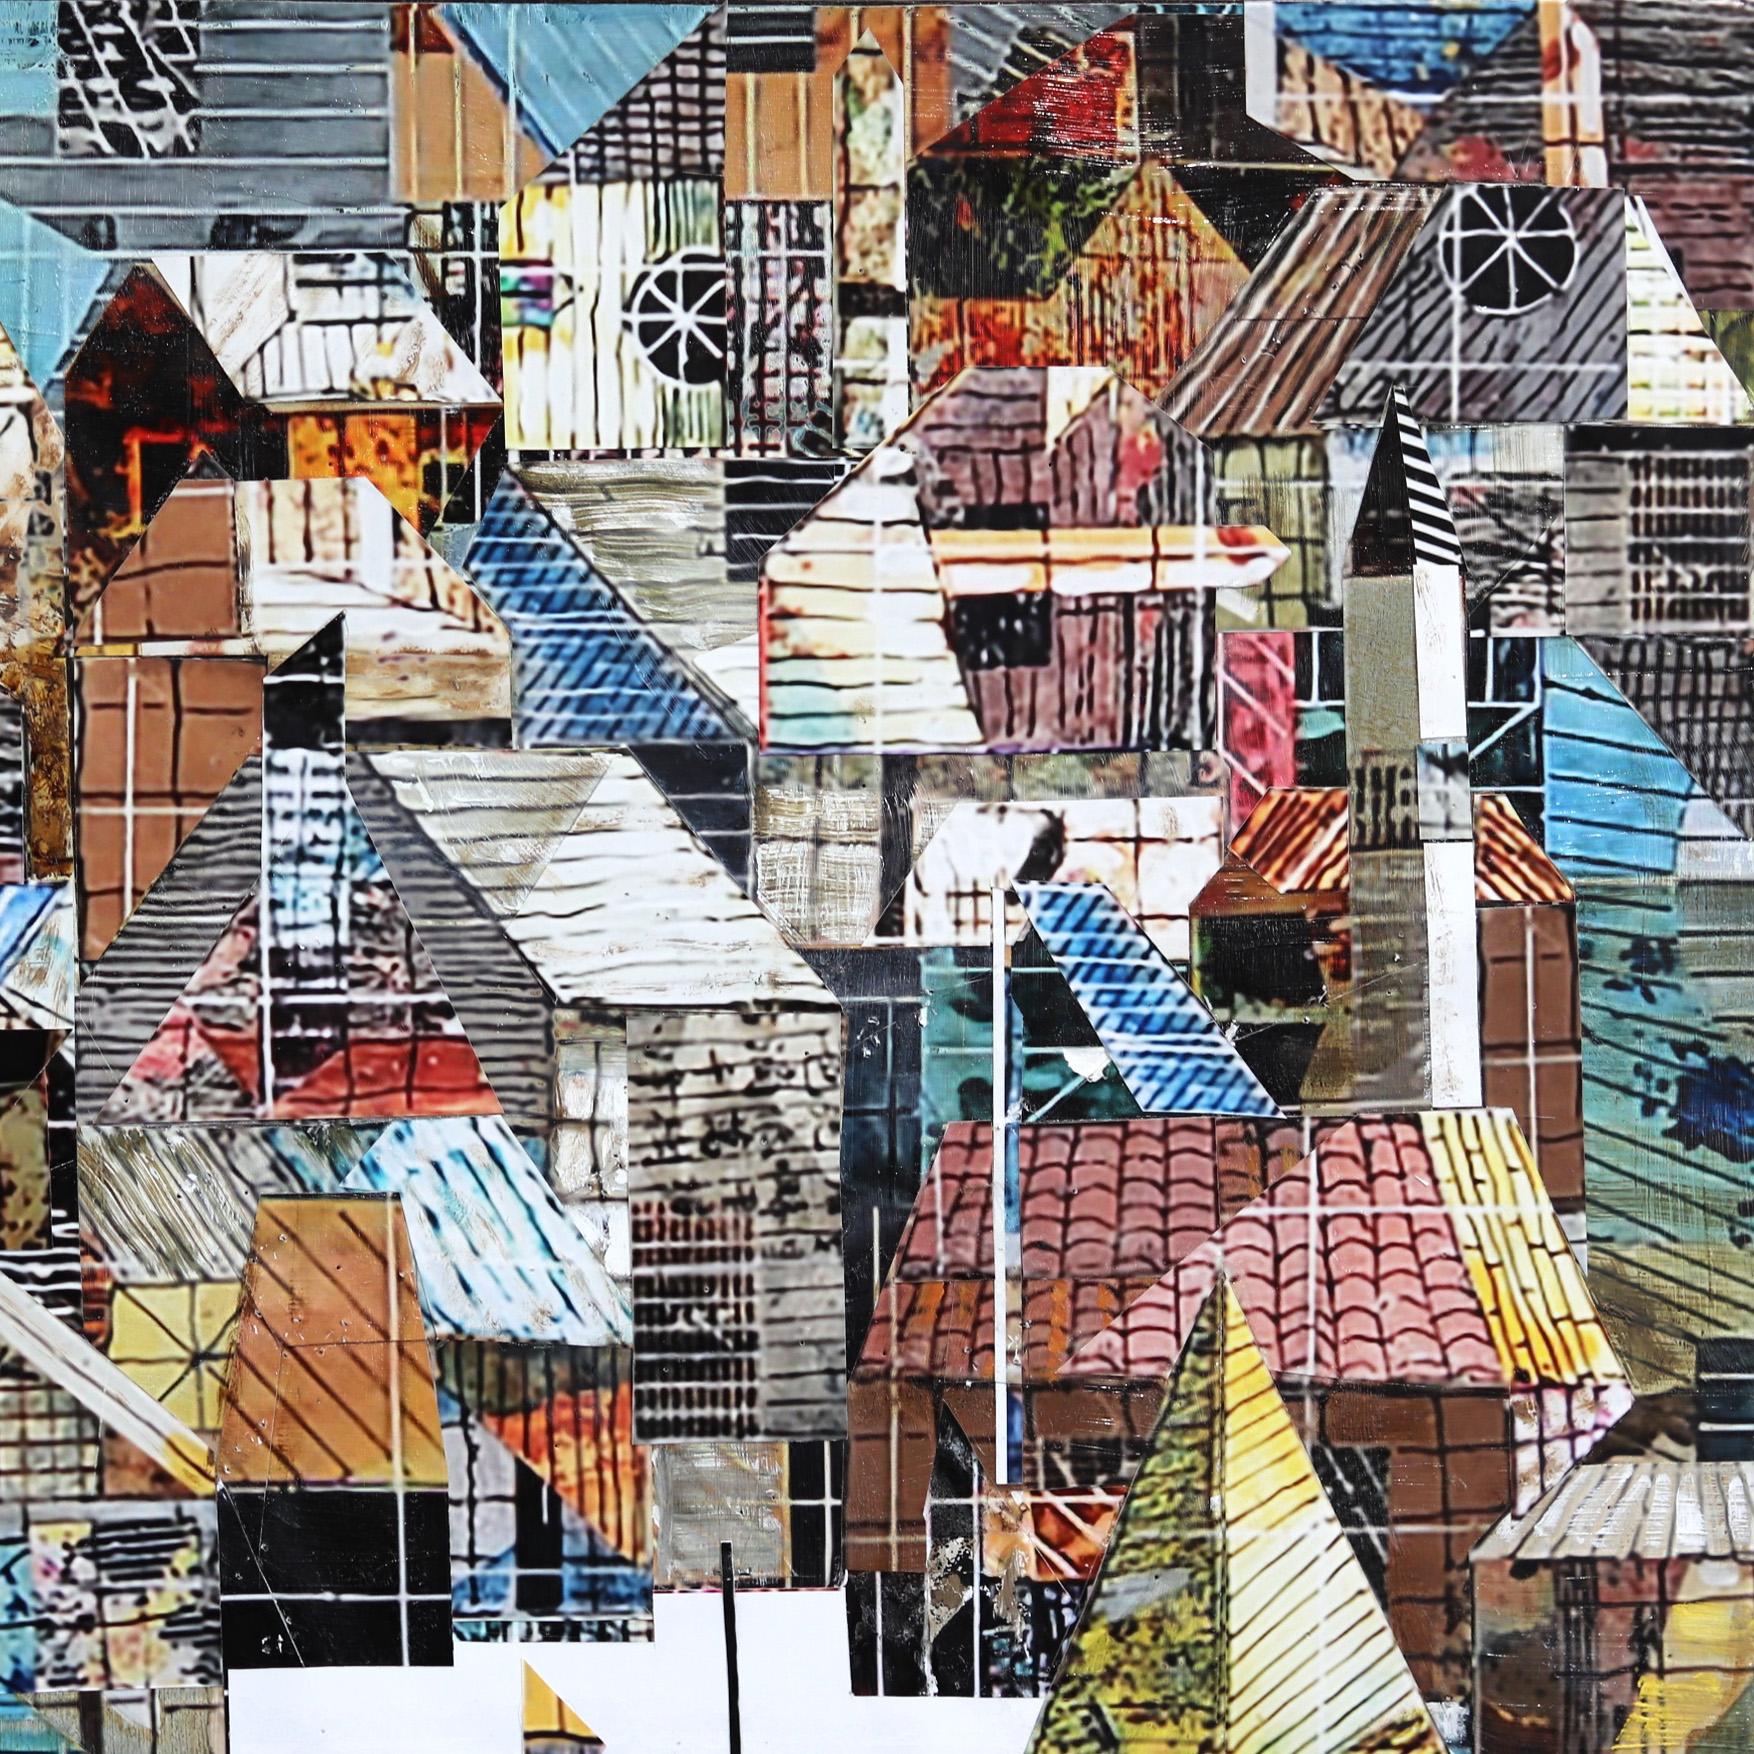 Sublime 2154 - Original Urban Landscape Photographic Collage Artwork - Contemporary Mixed Media Art by Tae Ho Kang